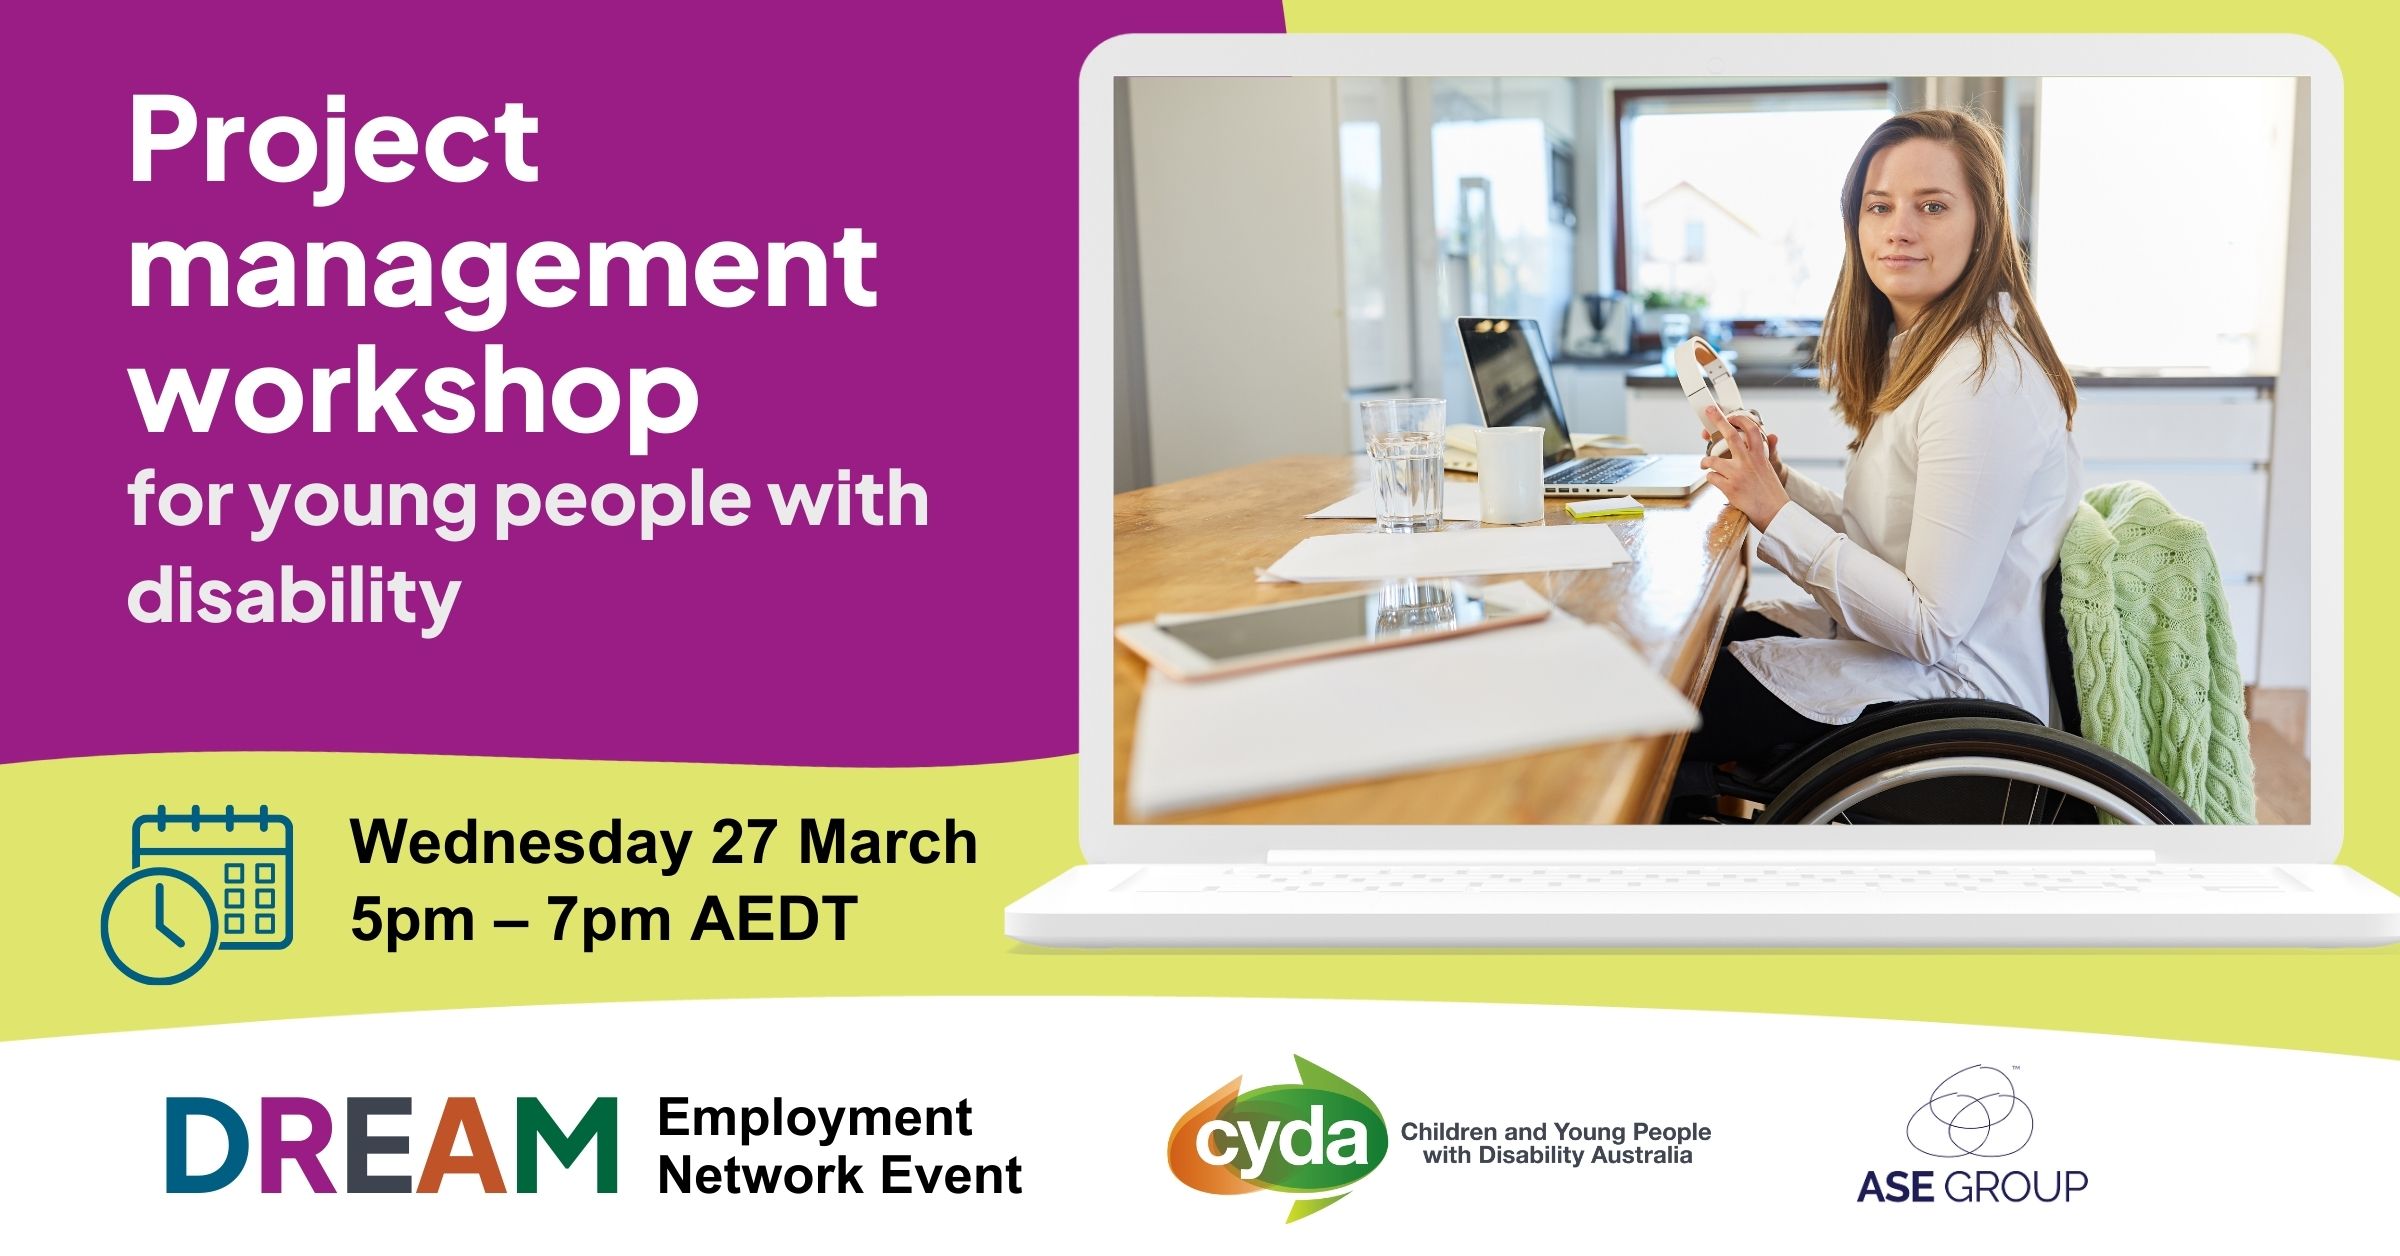 Text reads: "Project Management Workshop for young people with disability. Wednesday 27 March, 5pm - 7pm AEDT." To the right is a white laptop featuring a young woman in business attire sitting at an office desk and holding a pair of headphones. She has fair skin and shoulder length dark-blond hair and uses a manual wheelchair.